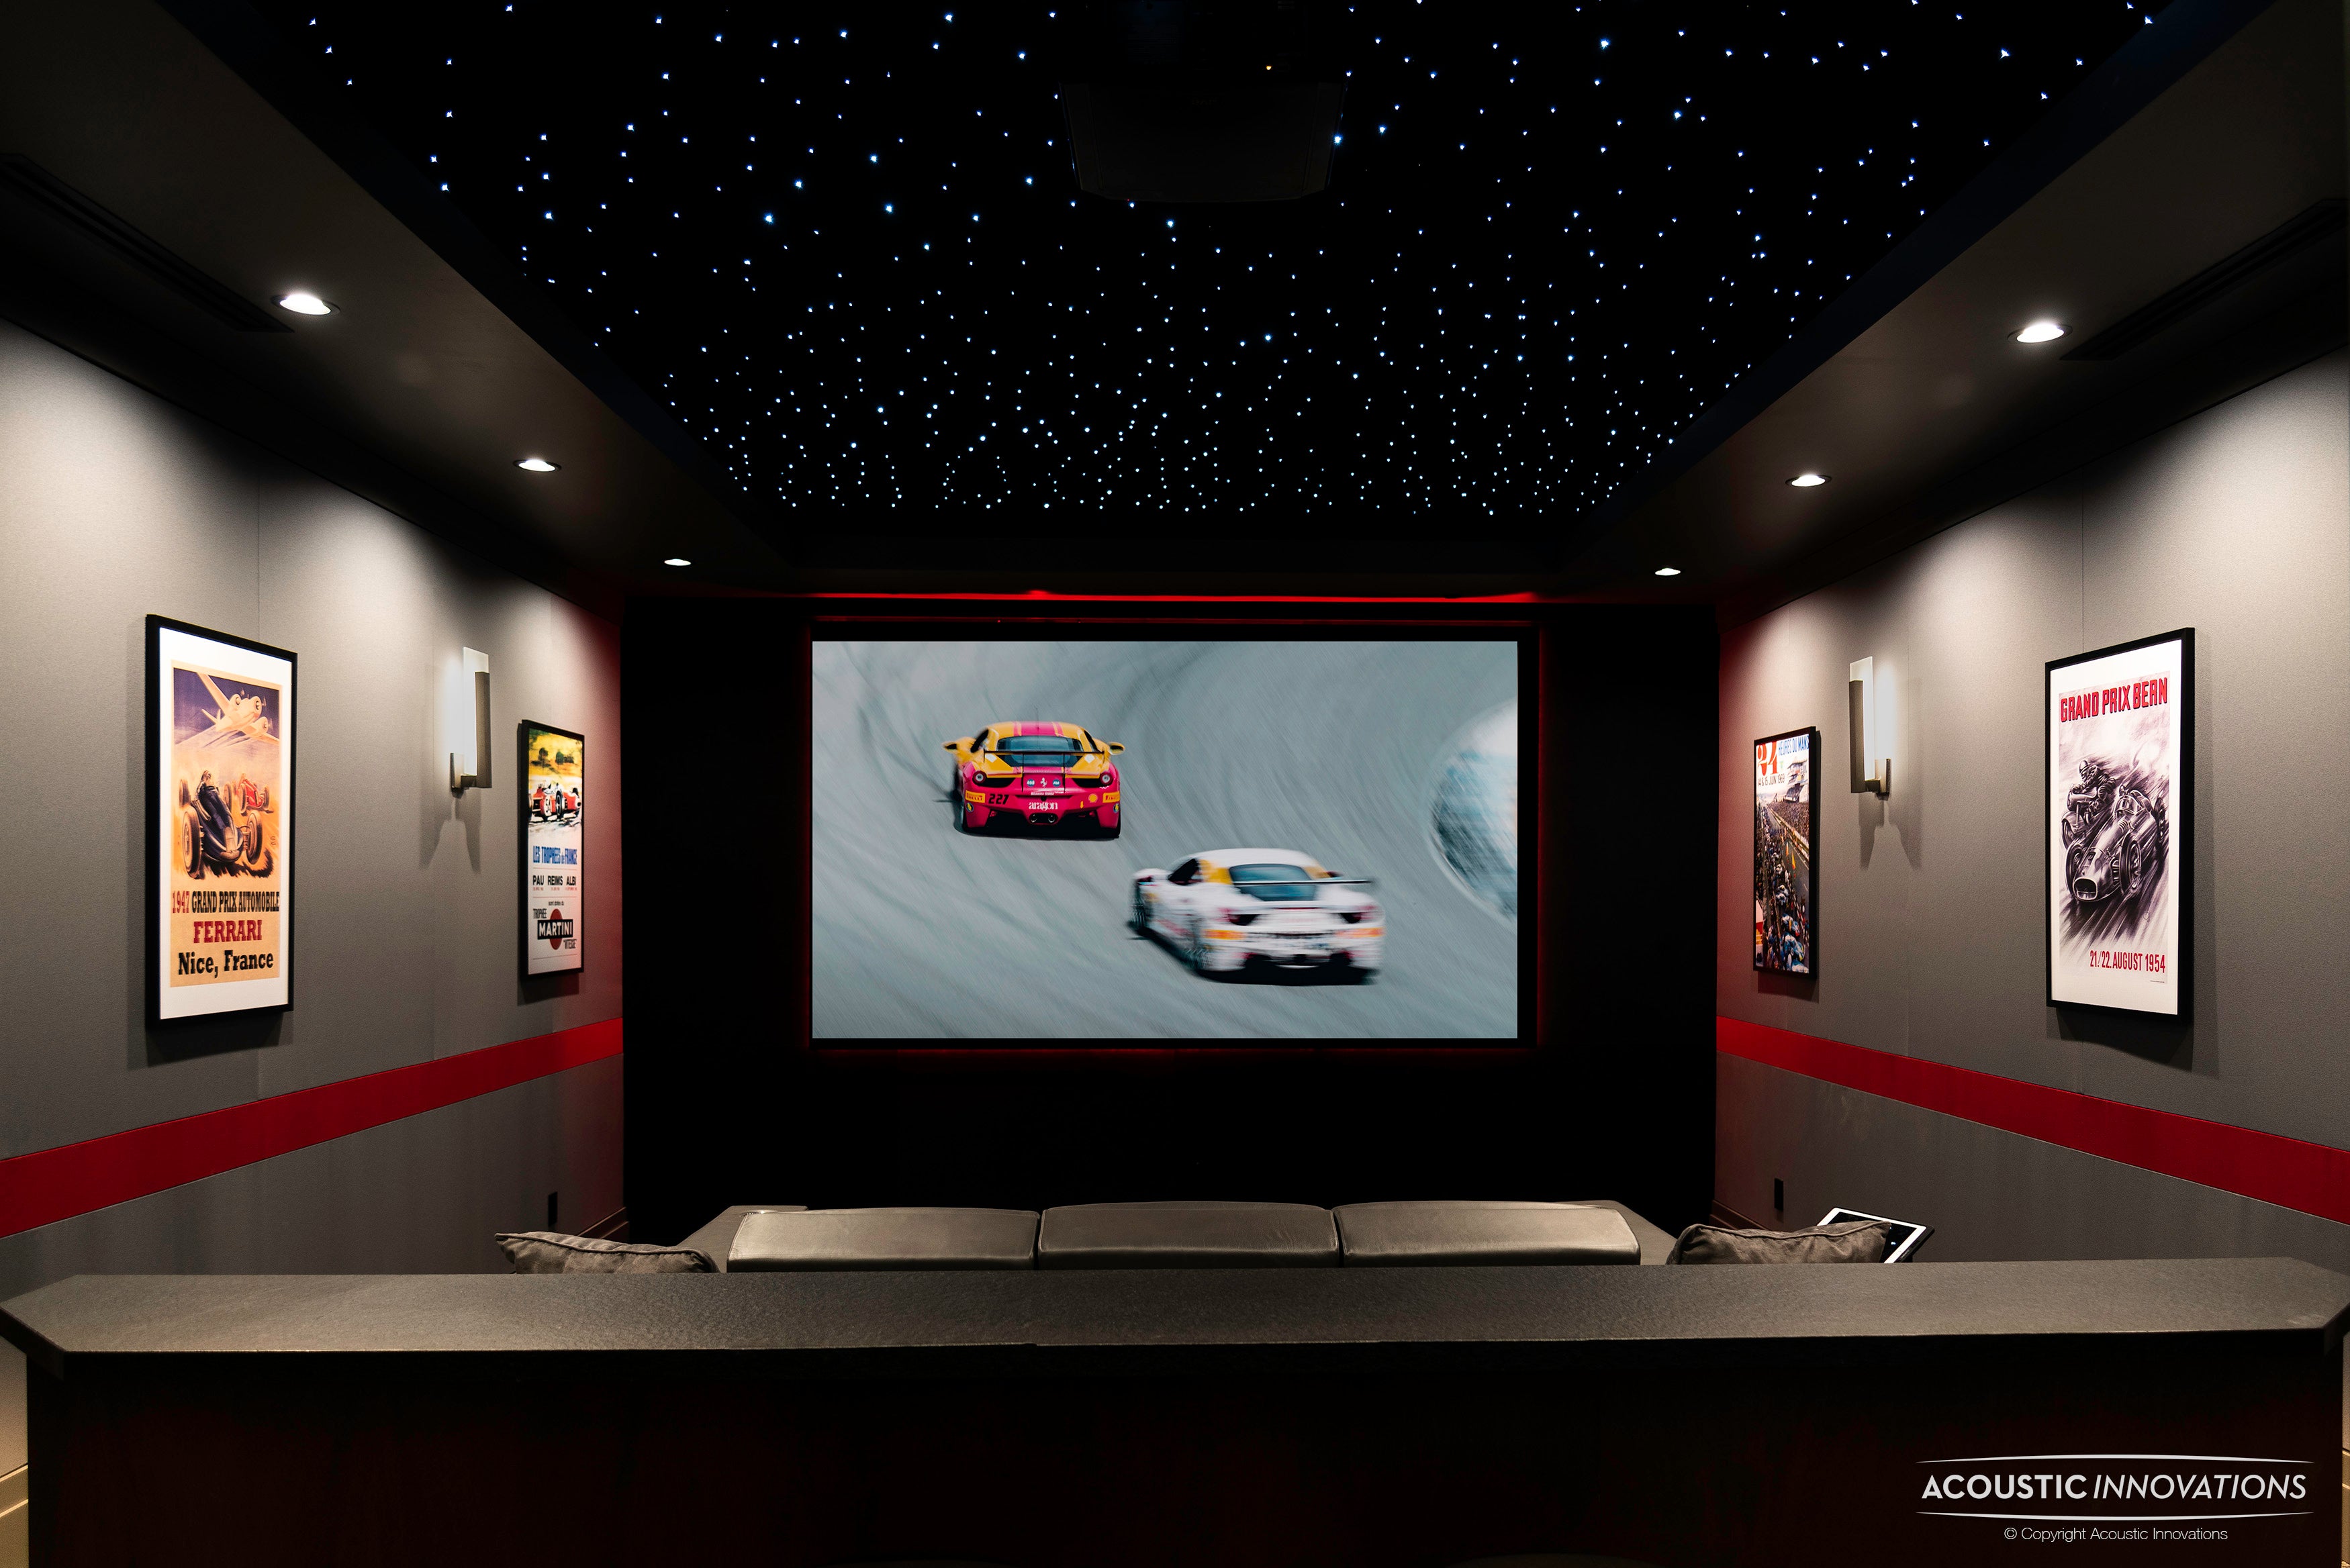 A picture showing a home theater starlight ceiling from Acoustic Innovations.